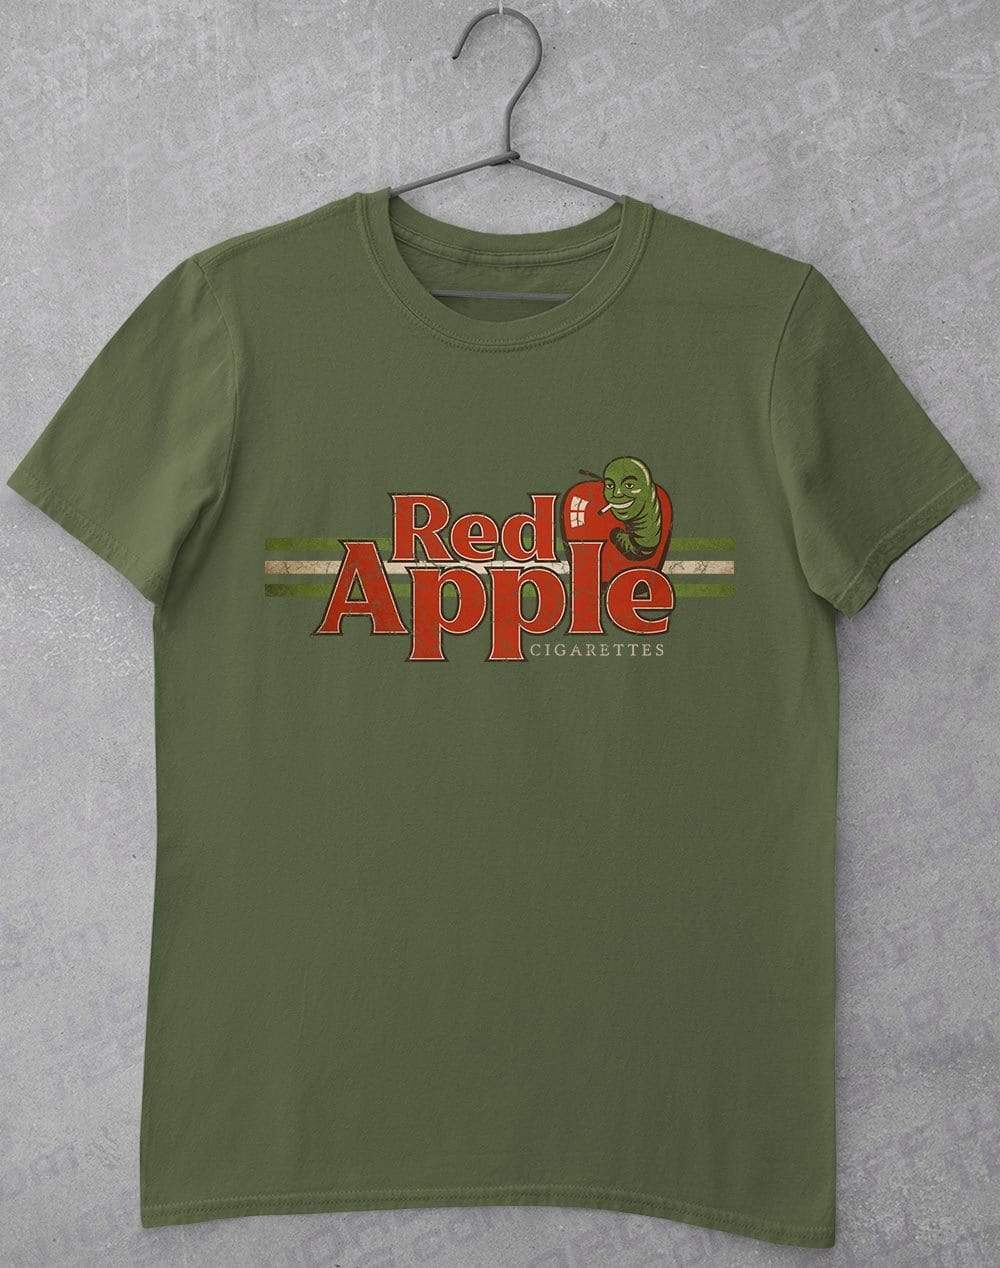 Red Apple Cigarettes T-Shirt S / Military Green  - Off World Tees